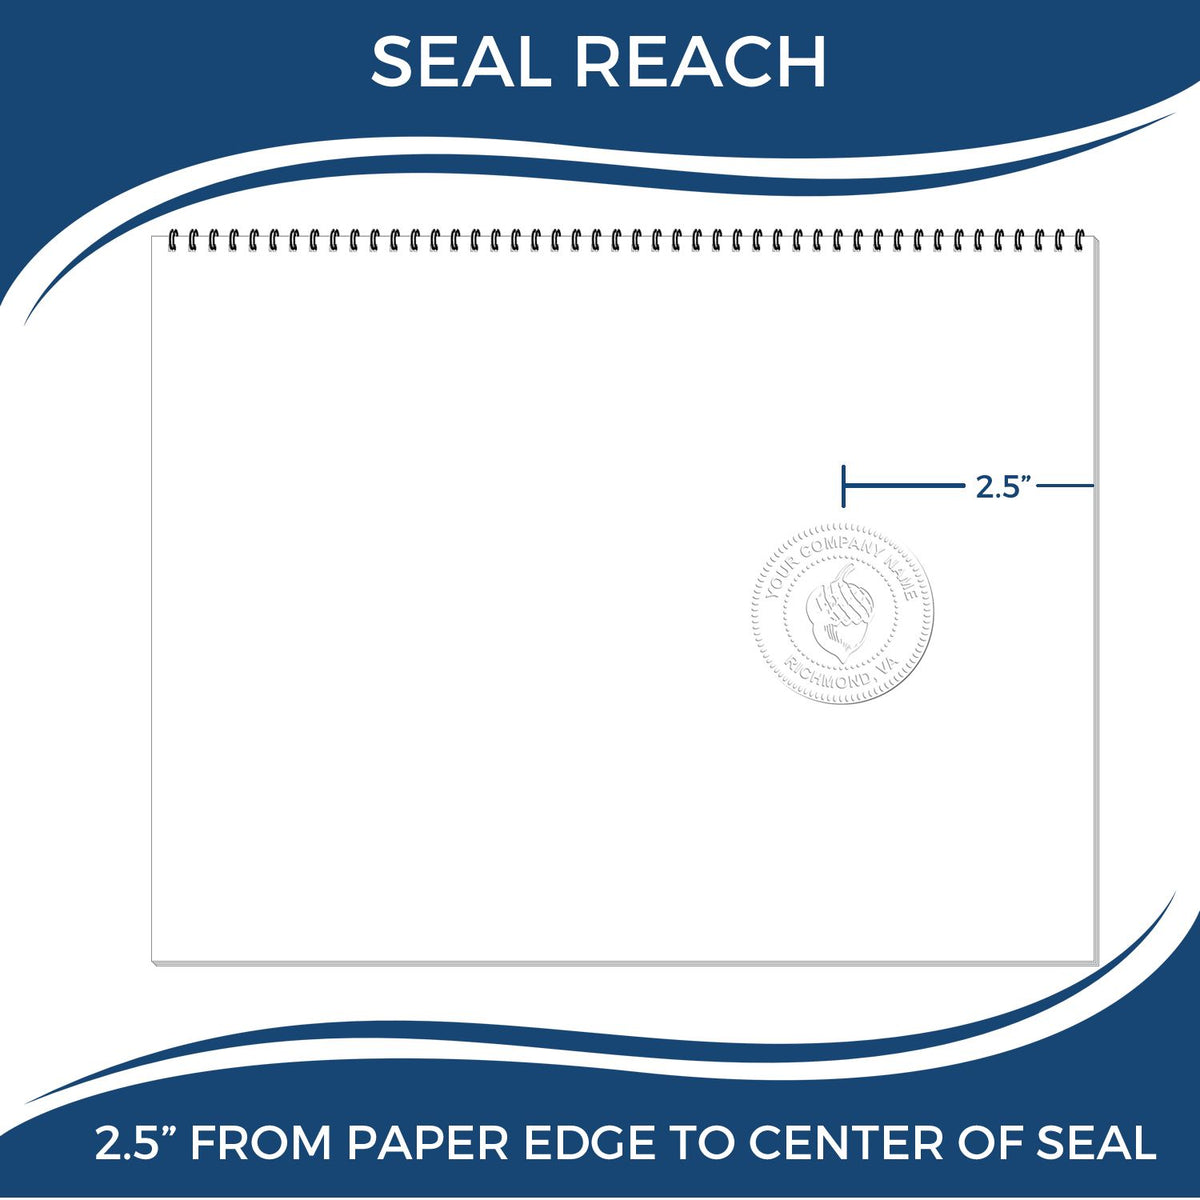 An infographic showing the seal reach which is represented by a ruler and a miniature seal image of the State of Georgia Long Reach Architectural Embossing Seal